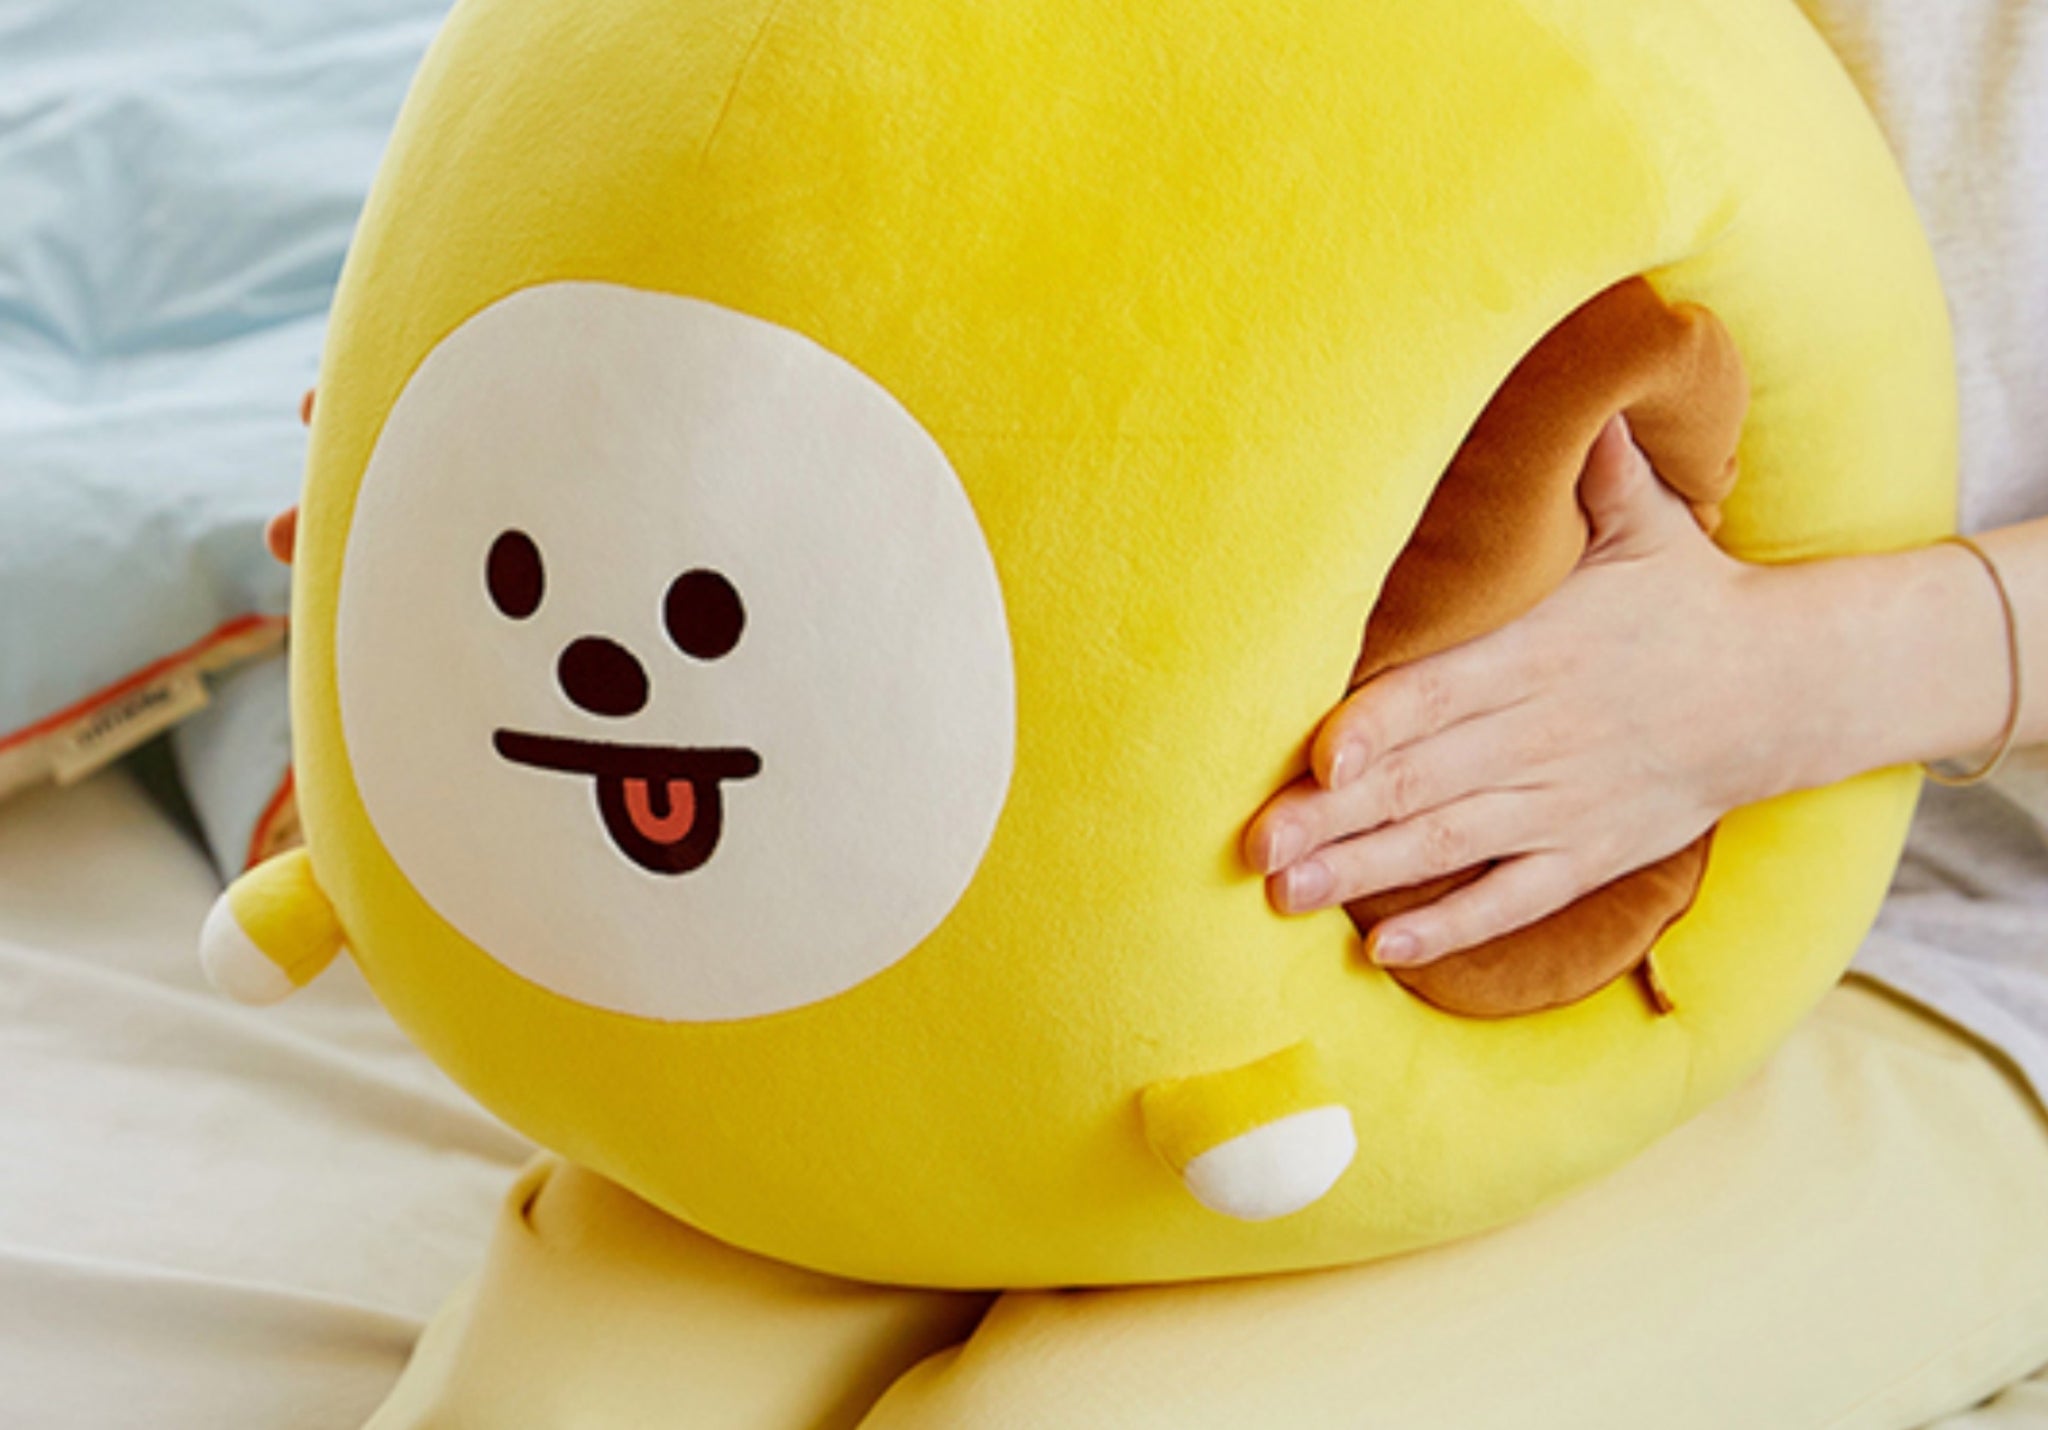 BT21 CHIMMY DESK PILLOW FOR NAPPING CHEWY CHEWY CHIMMY